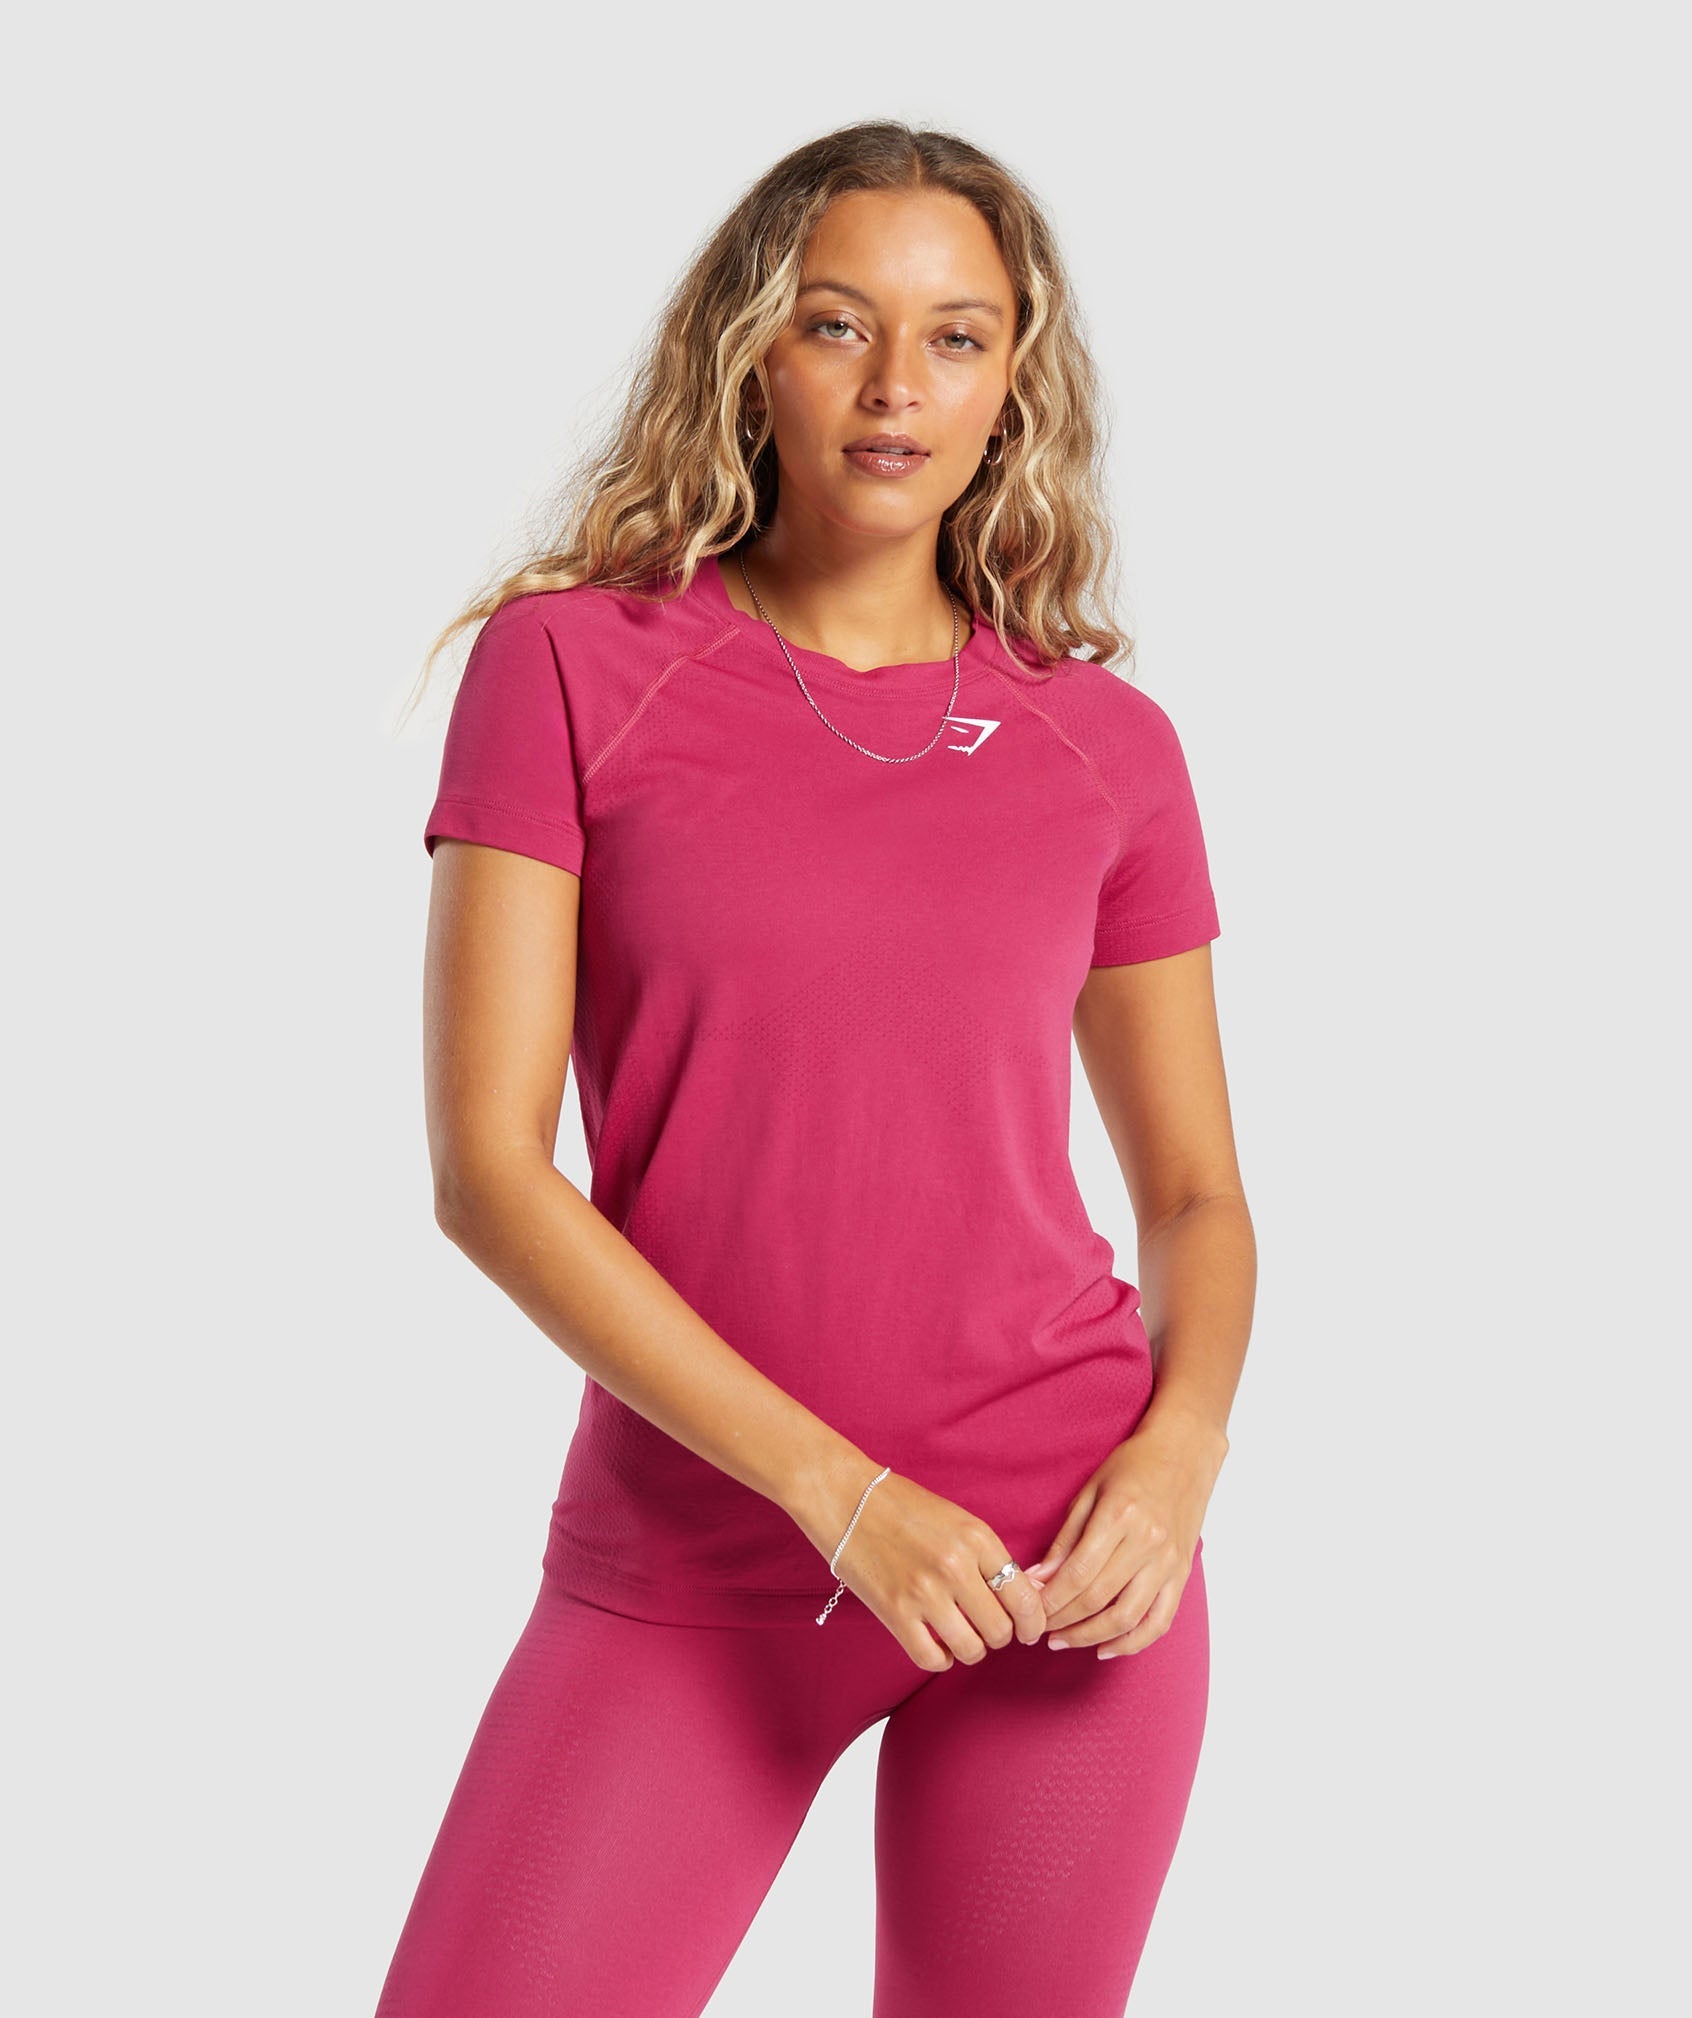 Vital Seamless 2.0 Light T-Shirt in Vintage Pink/Marl - view 1